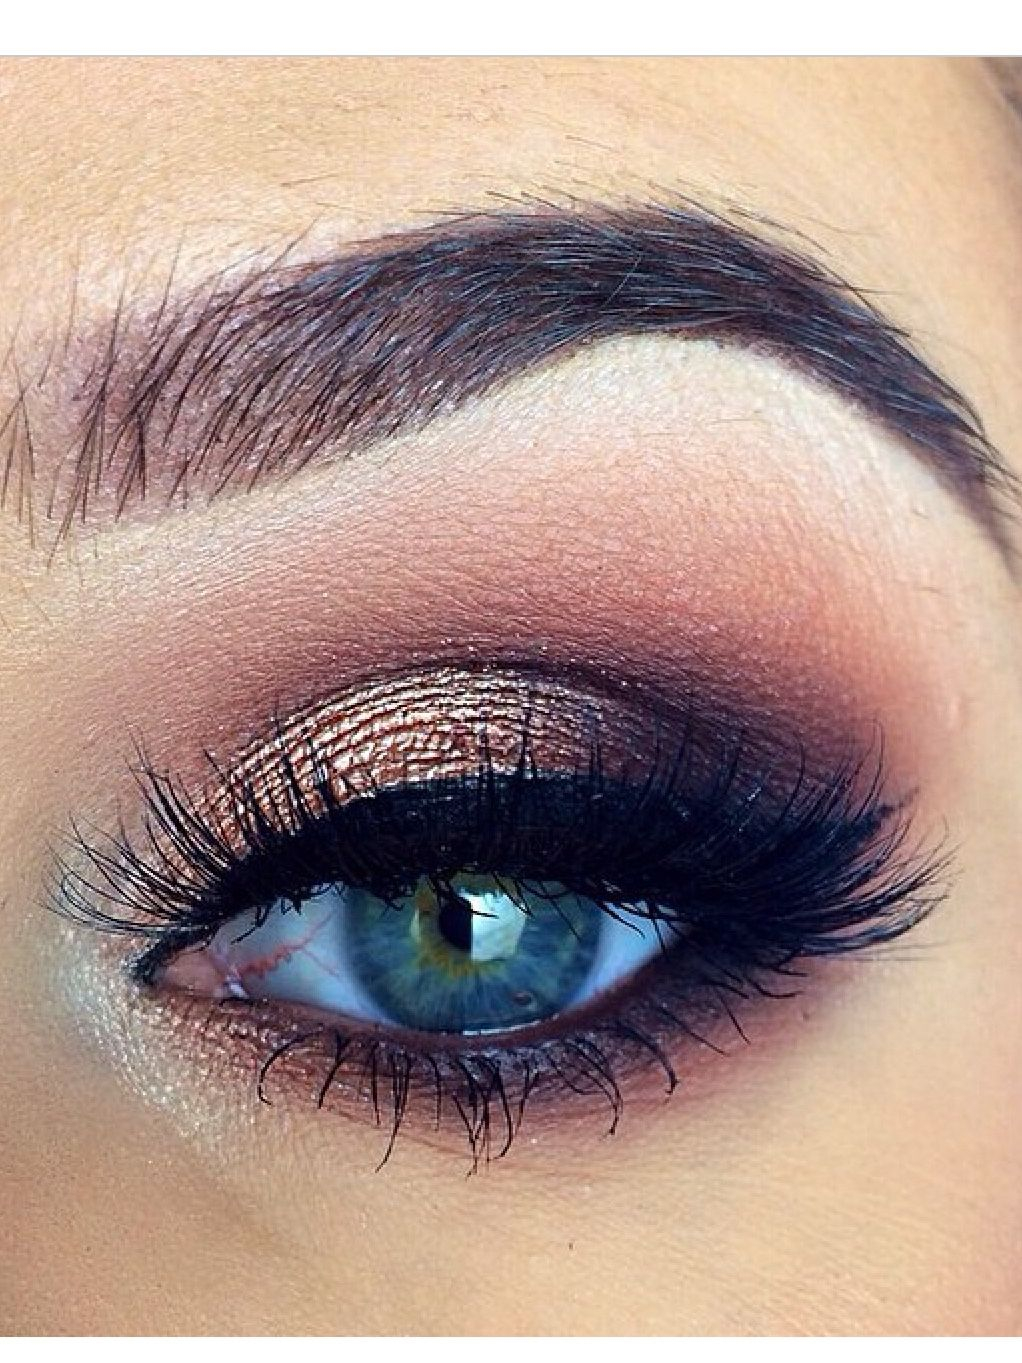 Eye Makeup For Prom Golden Ojos Y Maquillaje Pinterest Prom Eye Makeup Prom